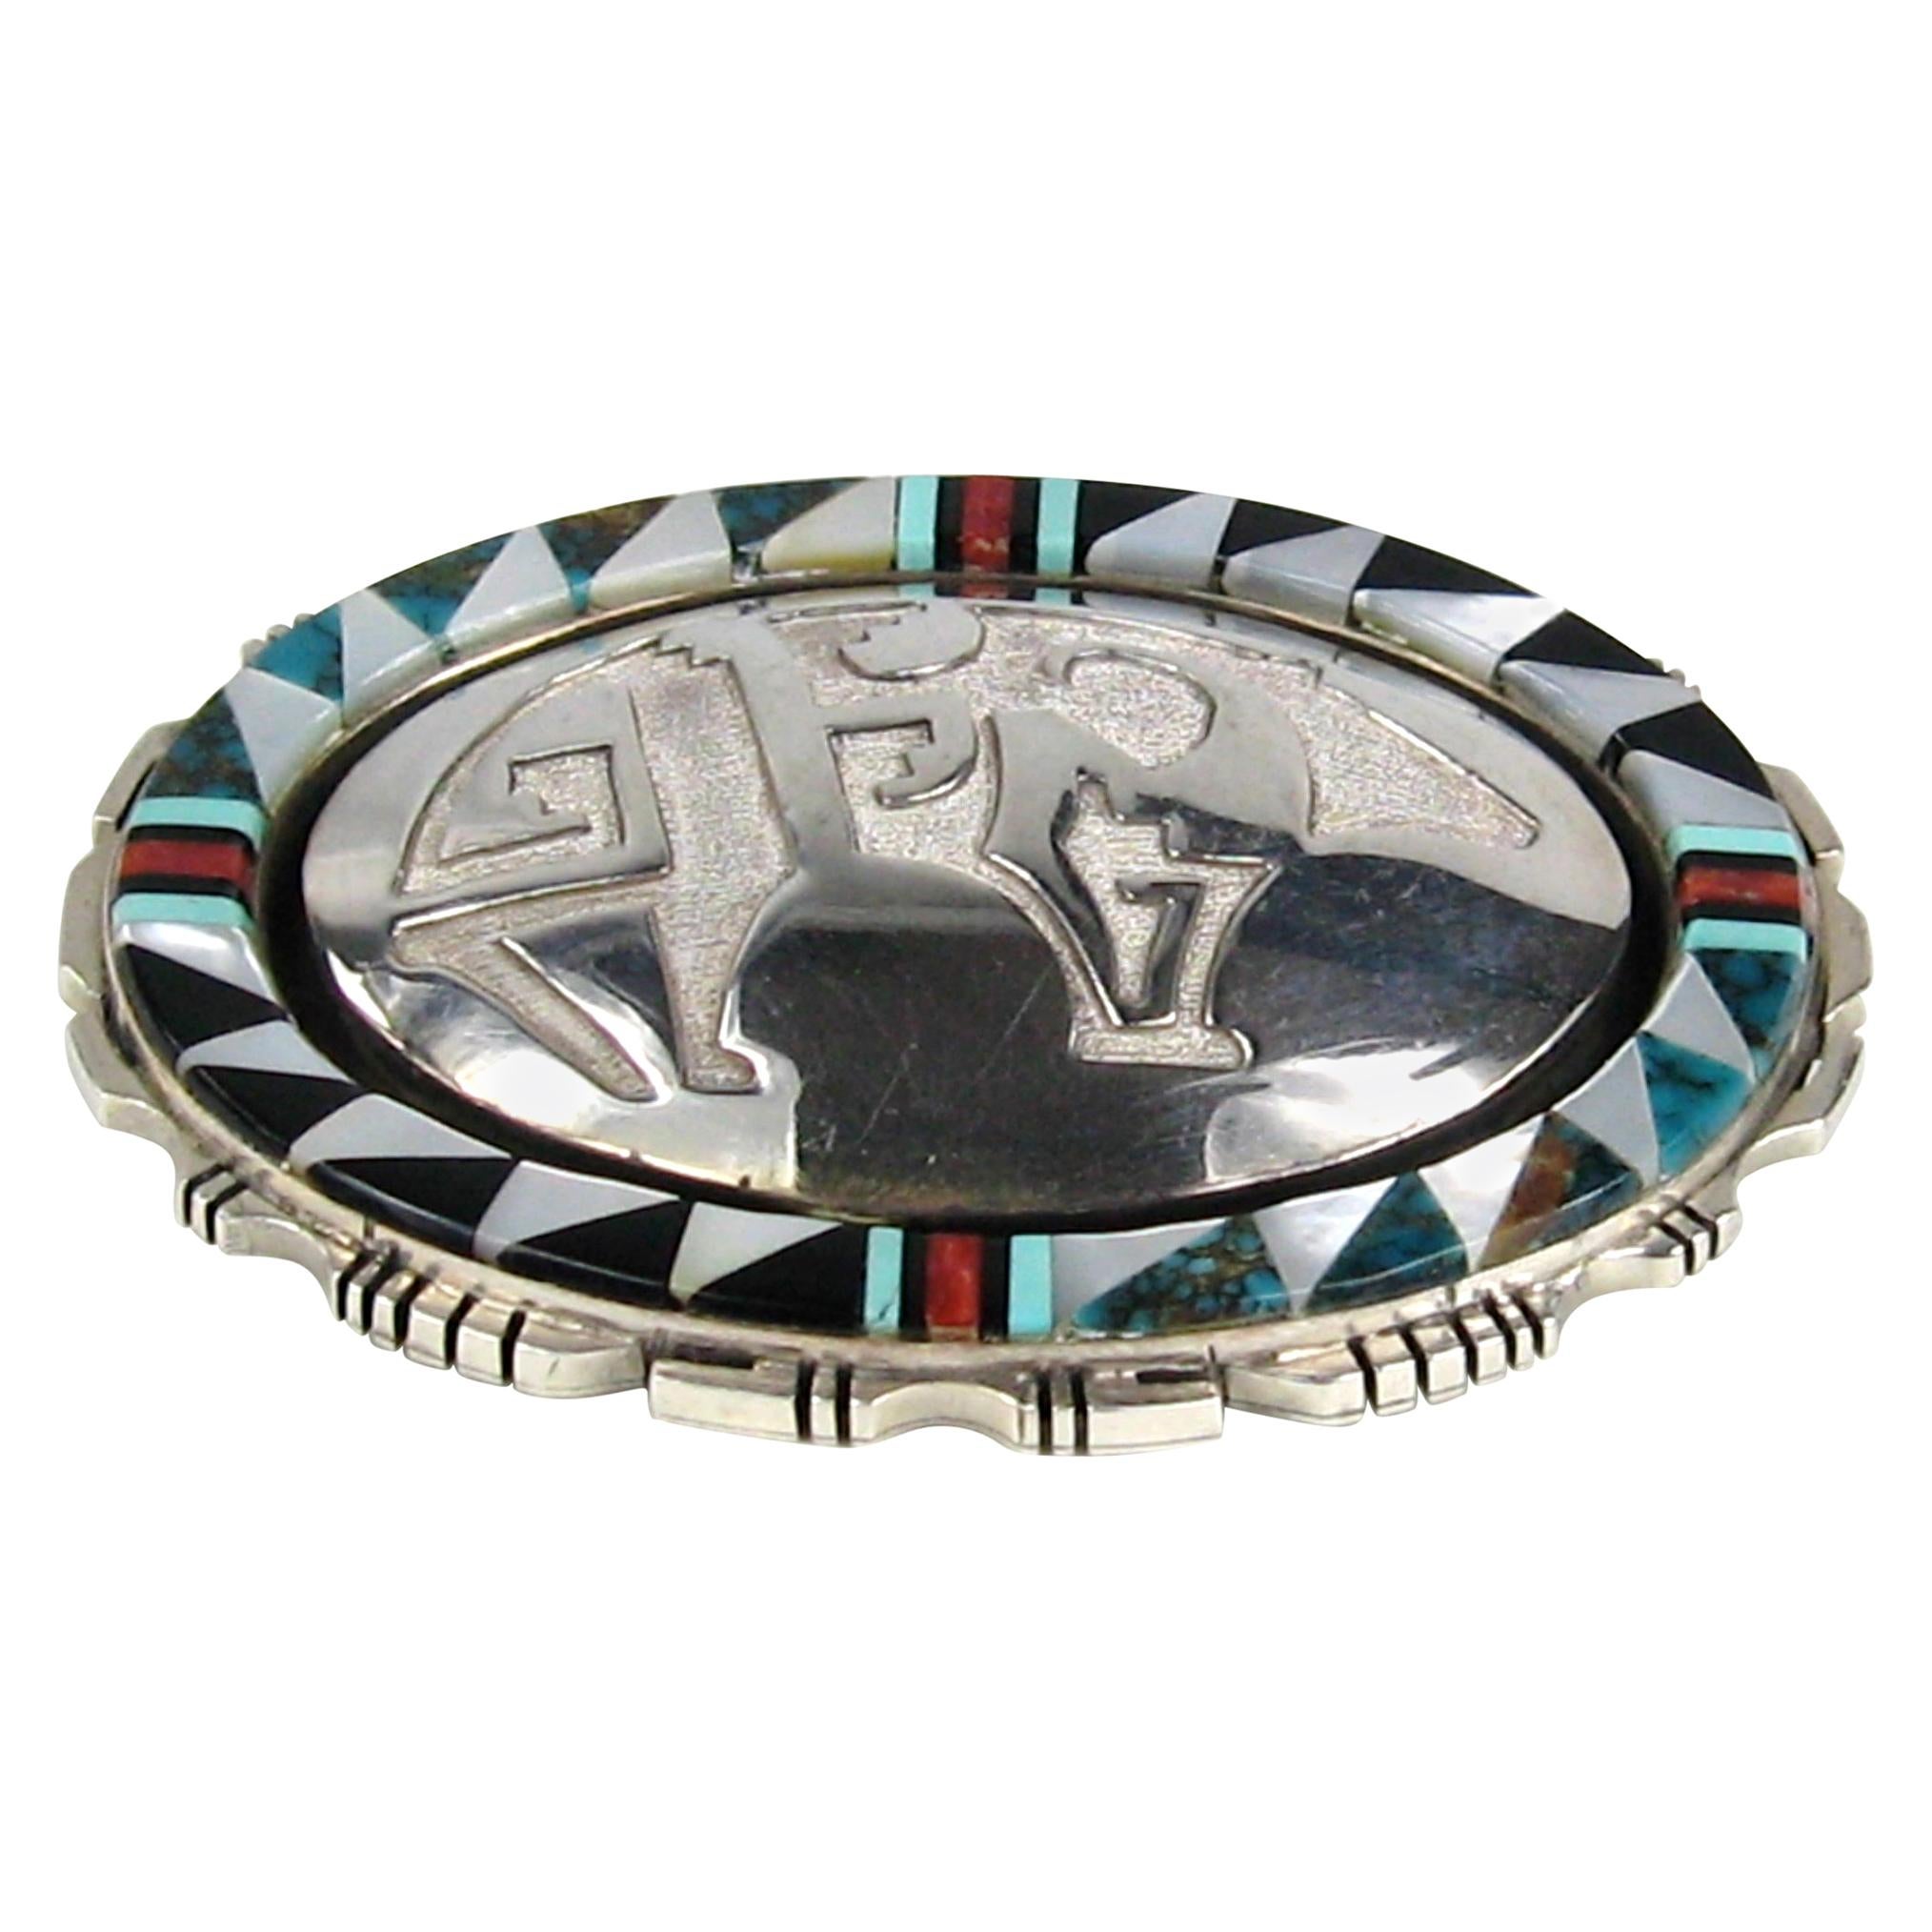 ZUNI Native American Sterling Silver Bear Inlaid Coral & Turquoise Pendant Pin 